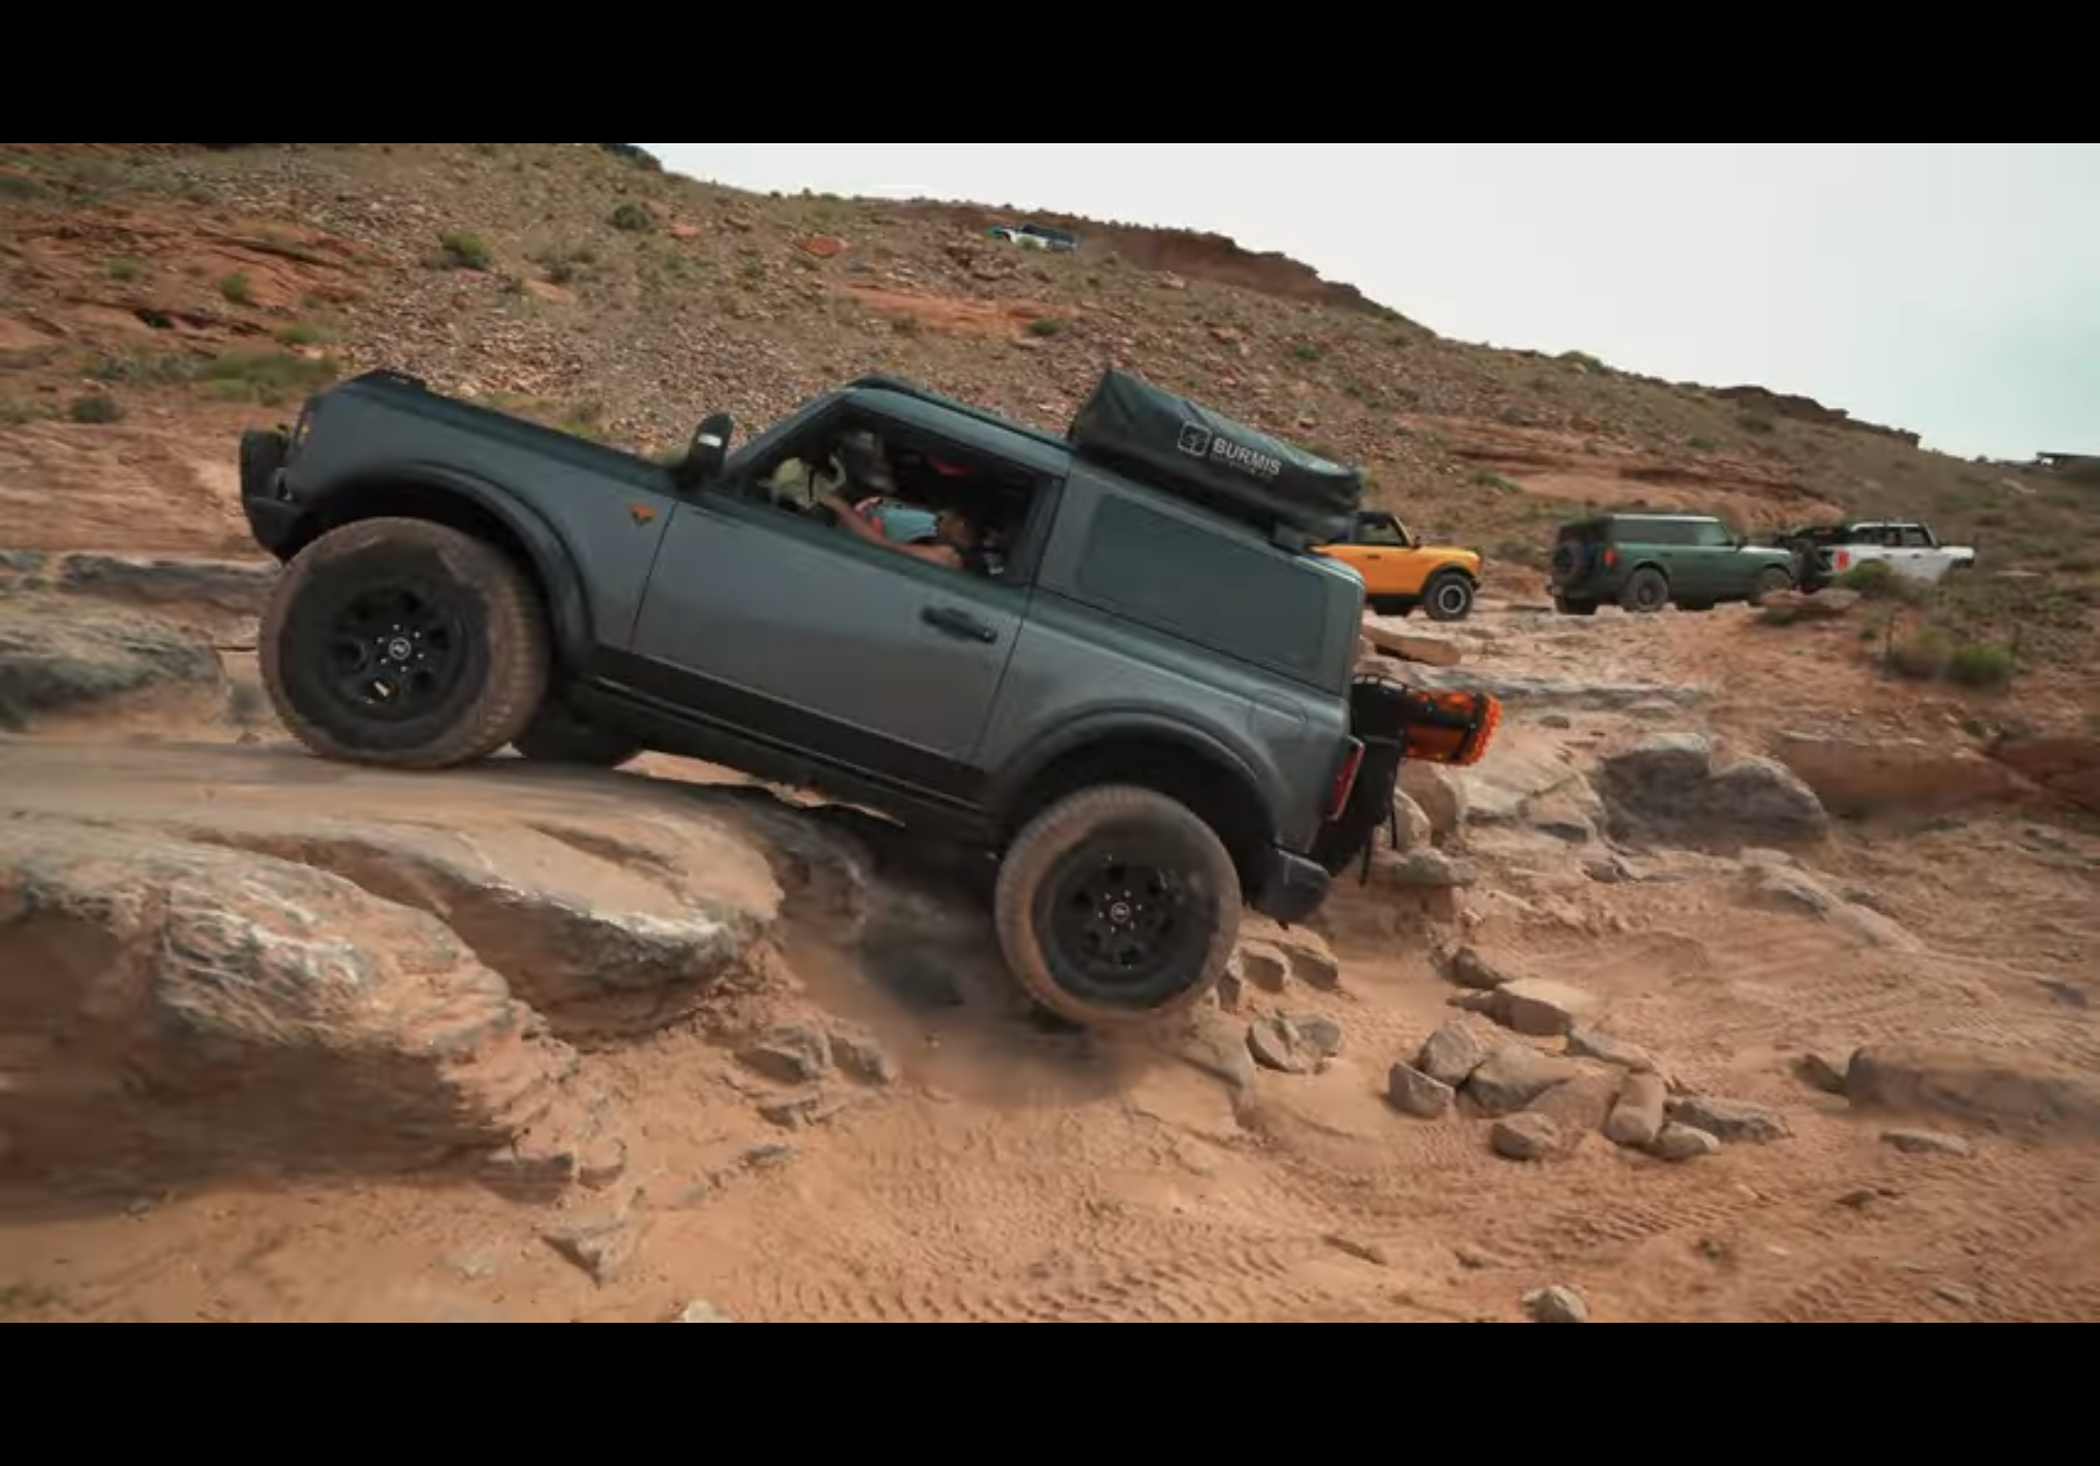 Ford Bronco Let's see your roof-top Tents and camping setups! bronco6